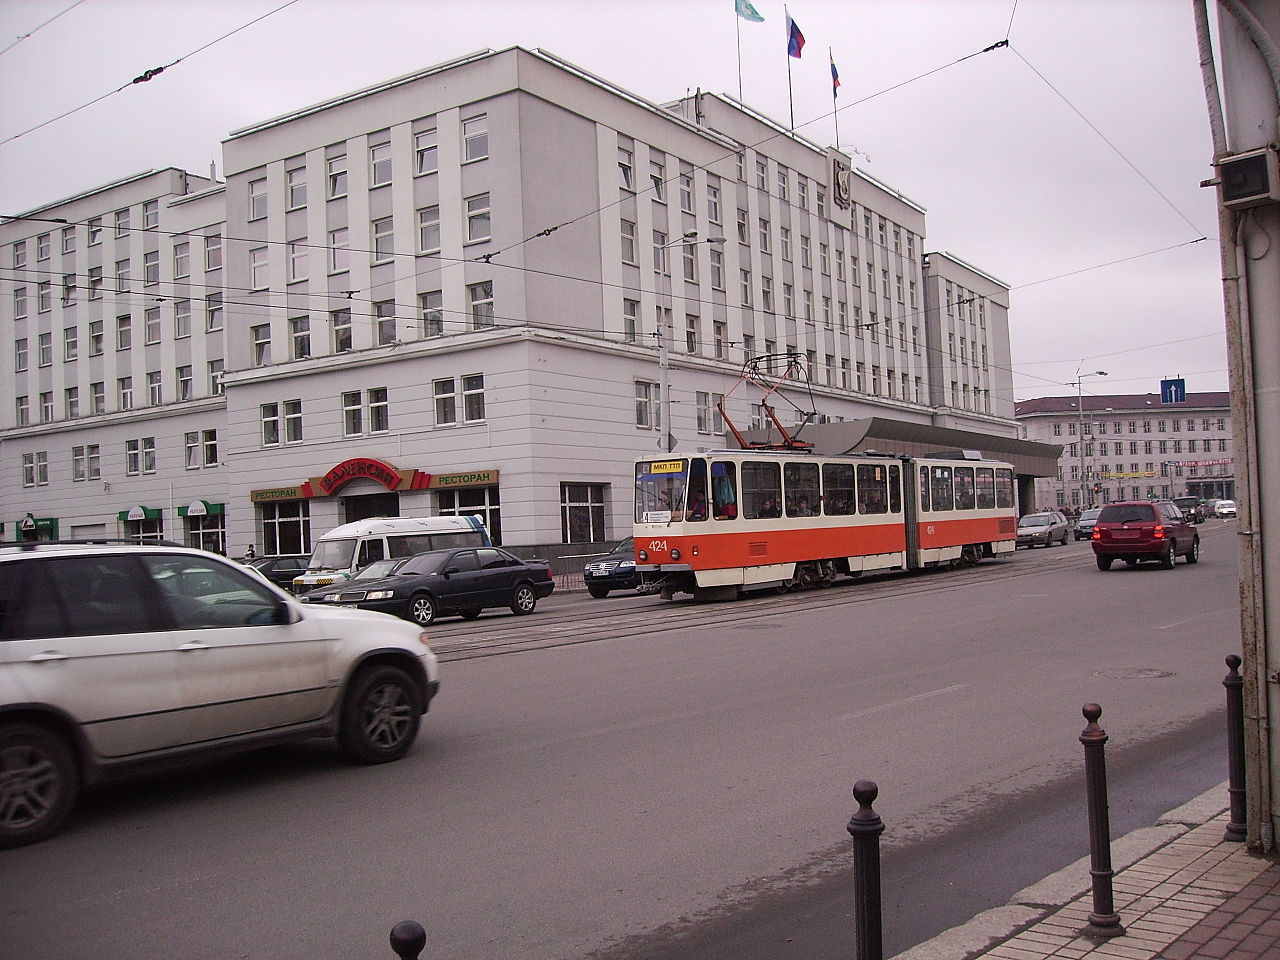 1280px-Kaliningrad_town_hall_and_tram424